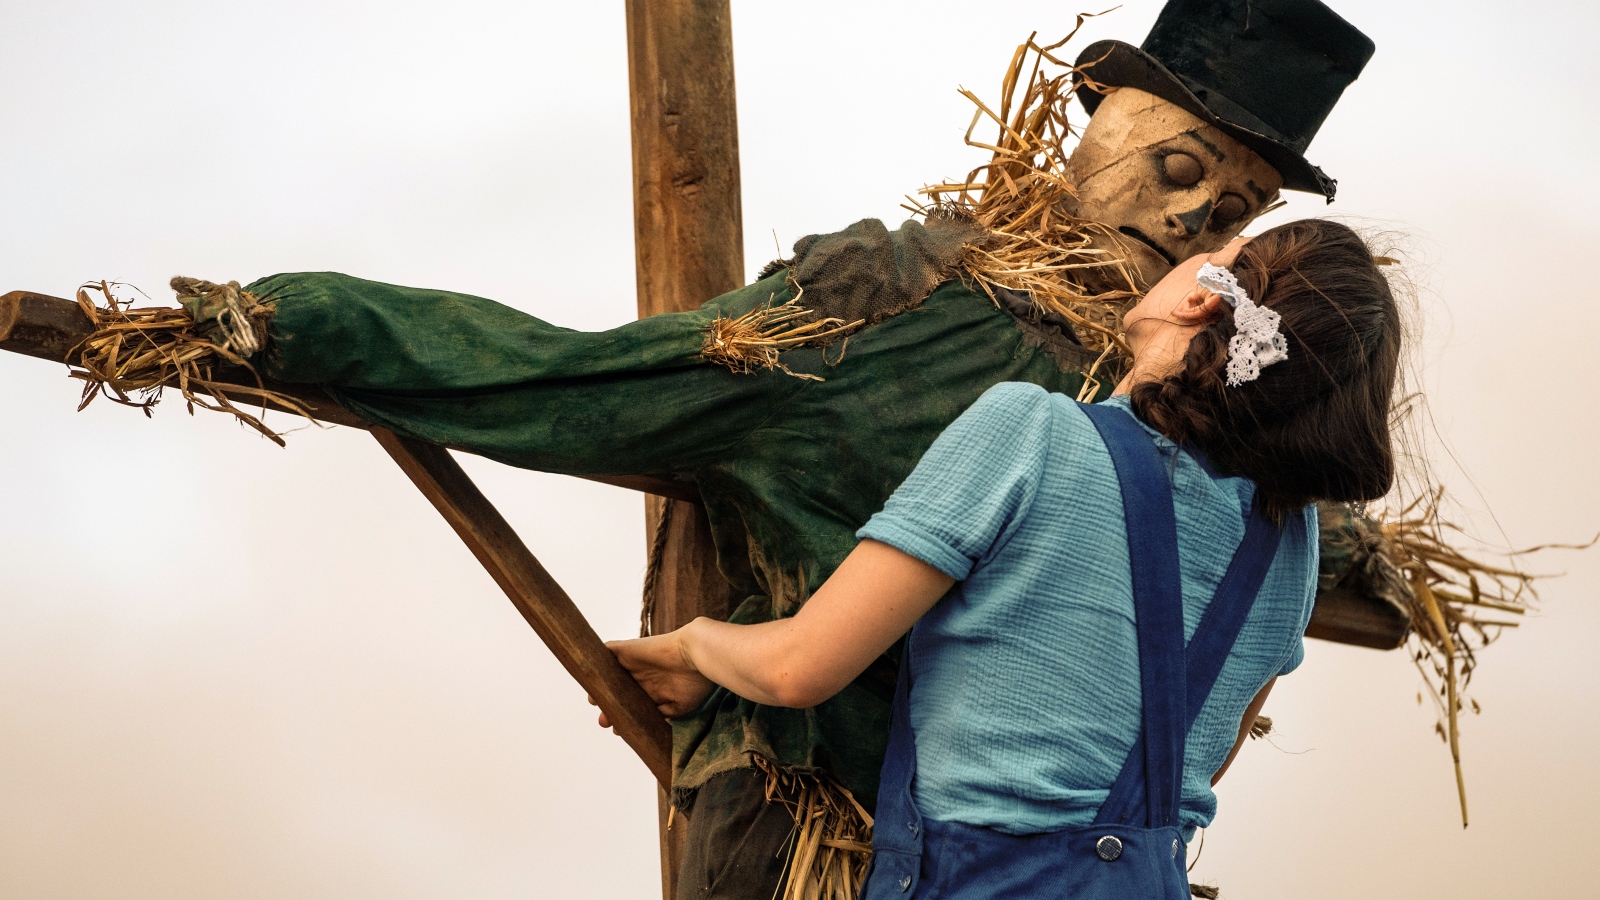 Mia Goth as Pearl hugging a scarecrow